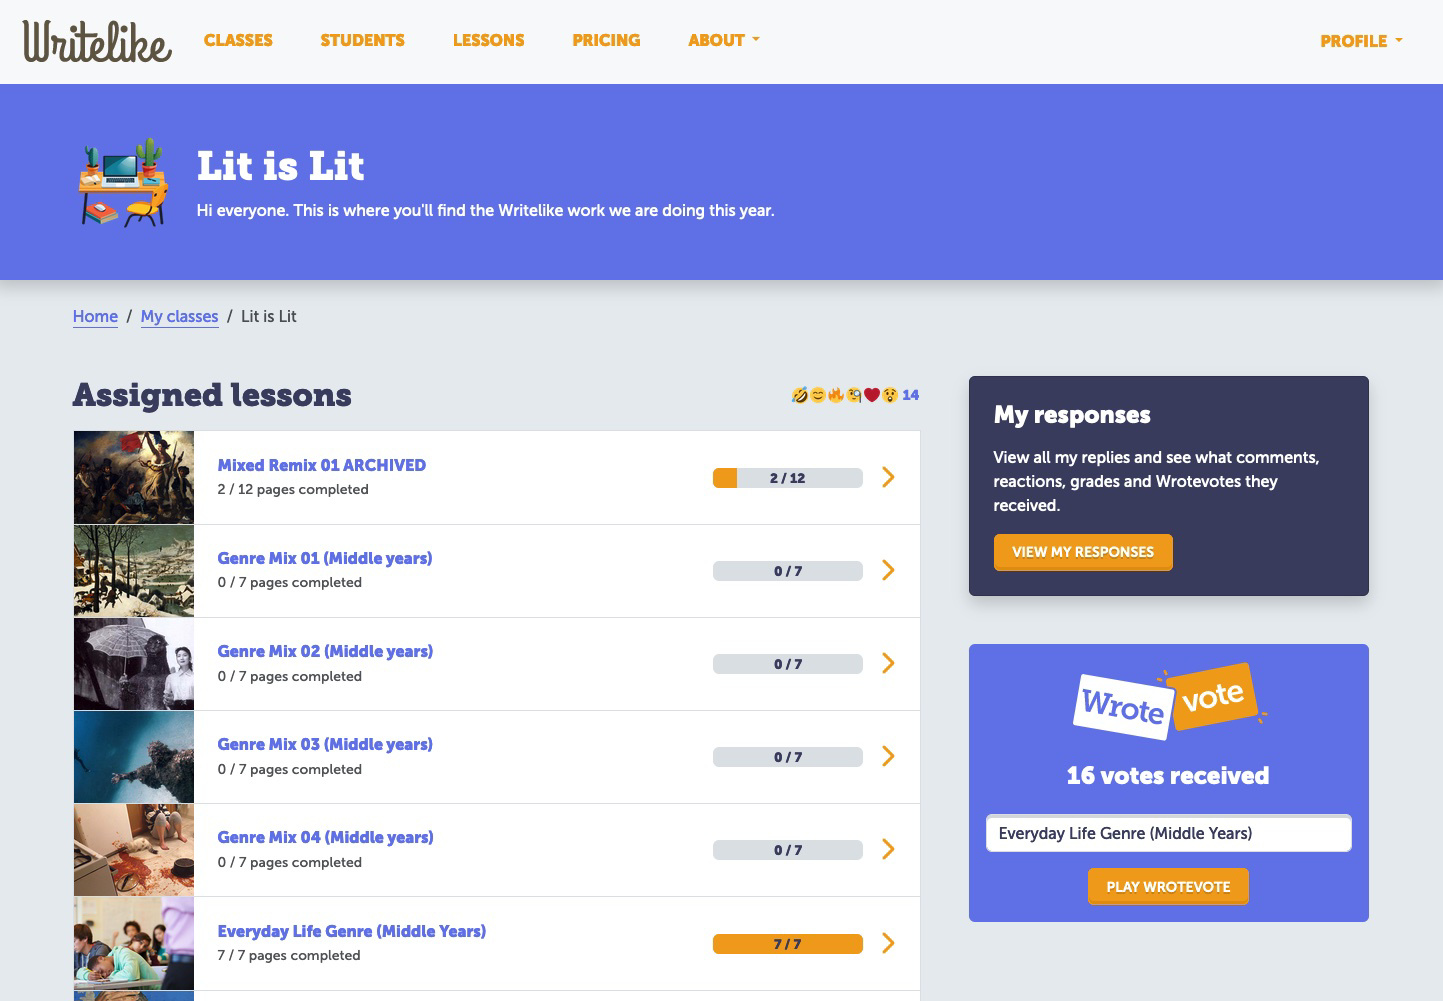 A sneak peak of the improved student lessons page. It's easy to see at a glance what lessons are assigned, how peers have reacted to their writing, and access Wrotevote.